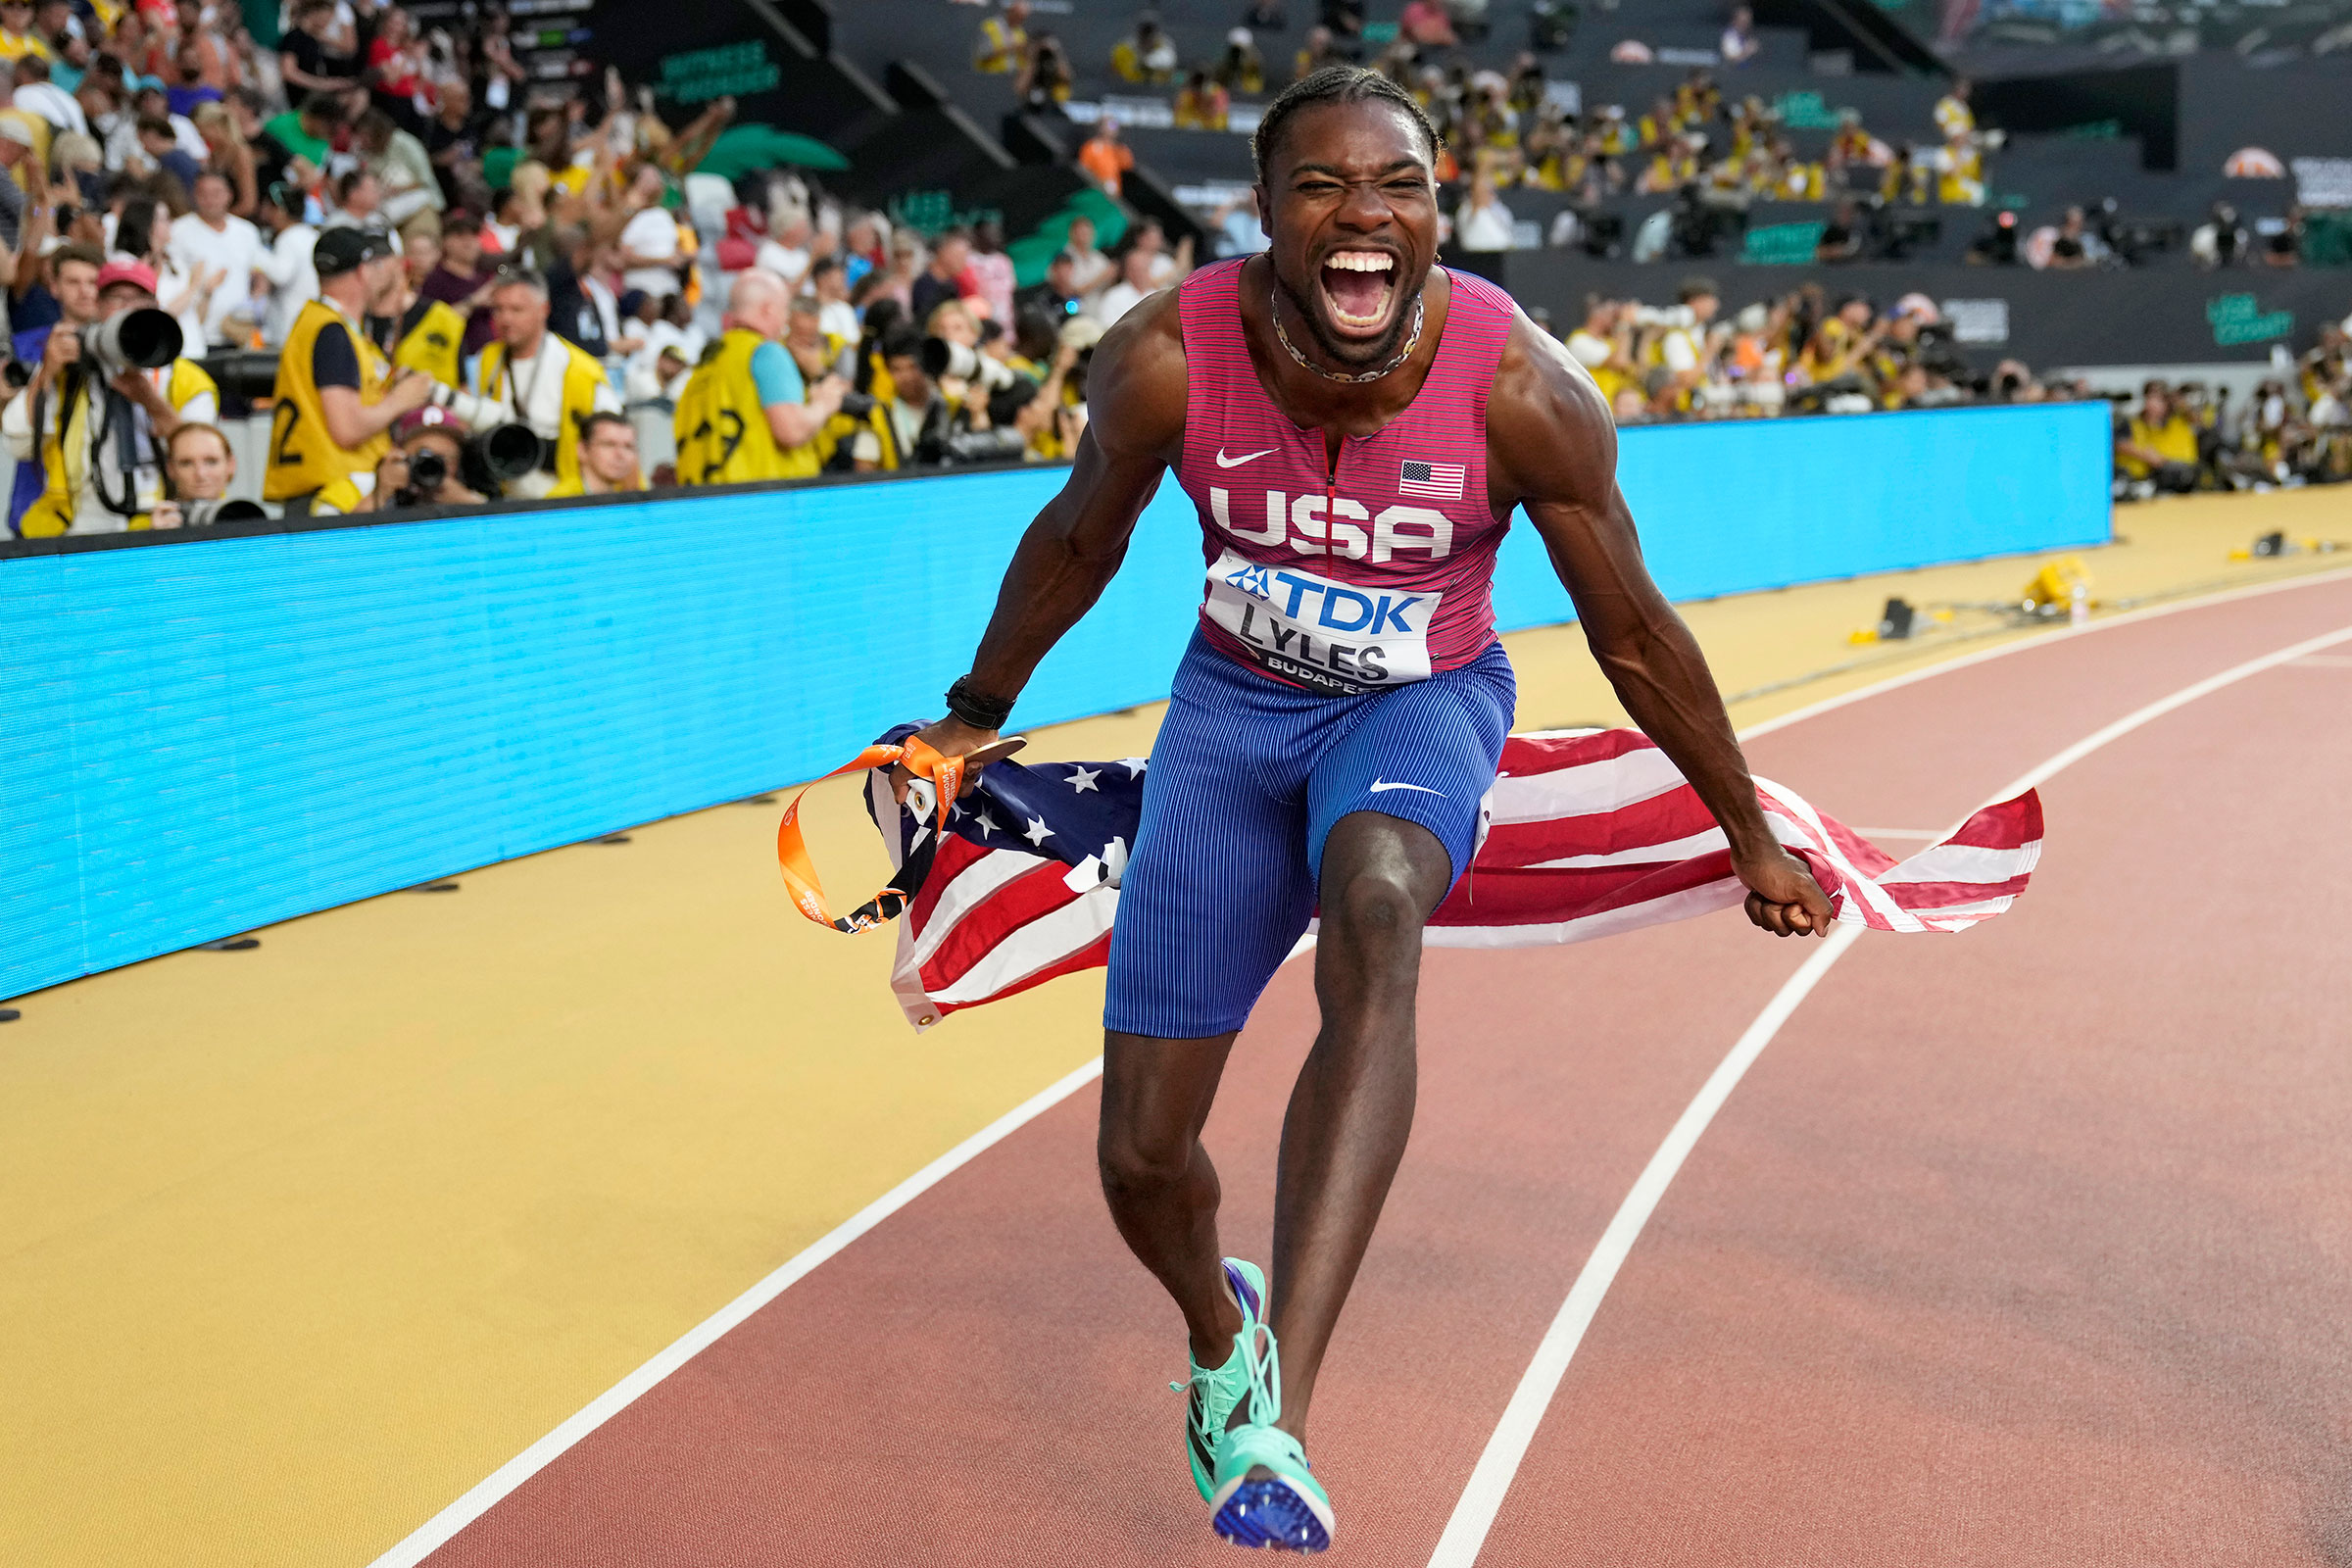 Lyles celebrates winning gold in the 100 m at the 2023 World Athletics Championships in Budapest